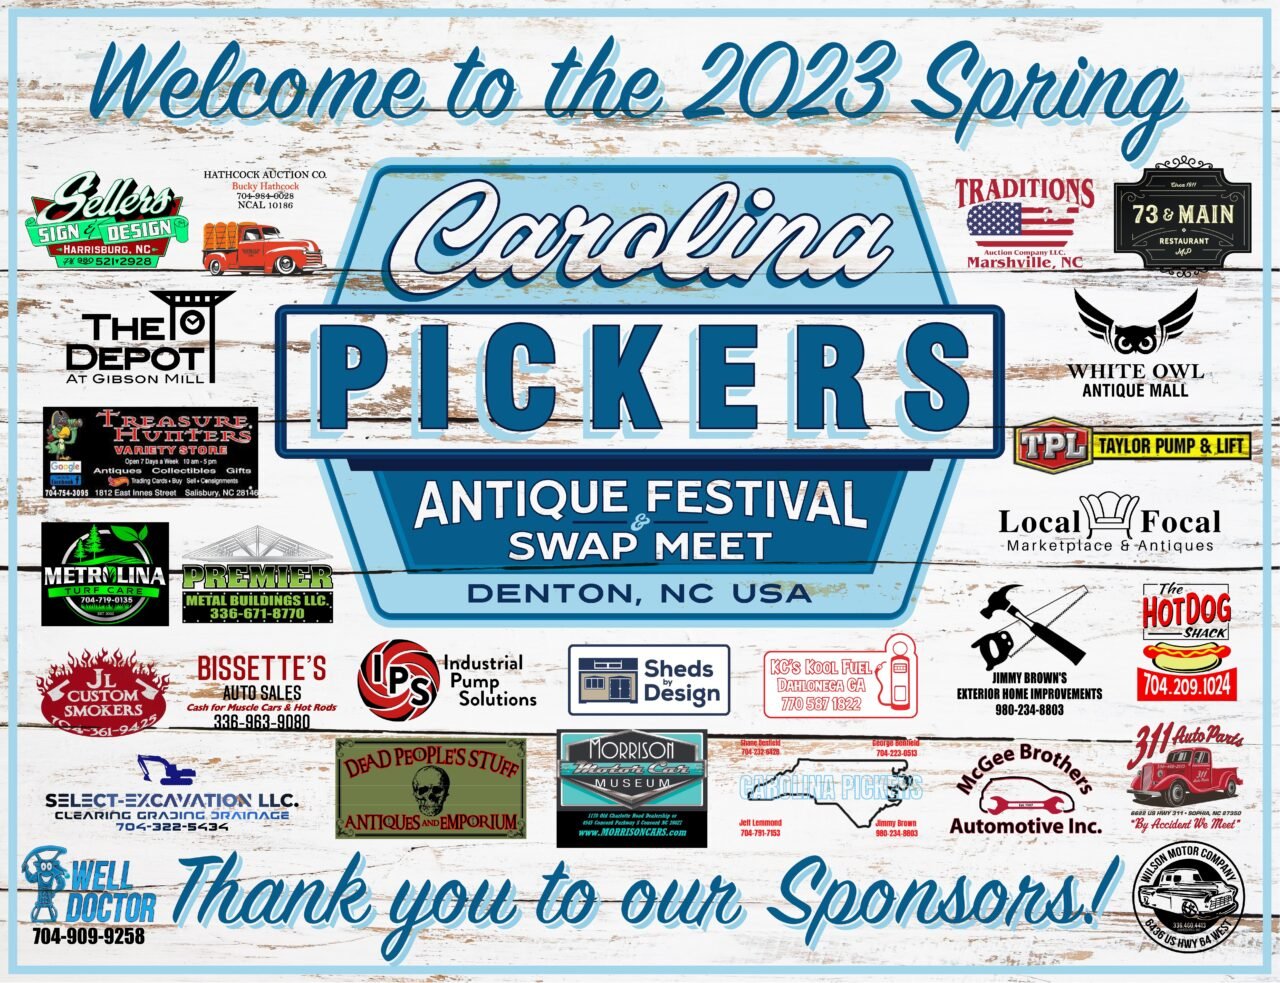 Carolina Pickers Festival Antiques, Vintage and Classic Cars Swap Meet